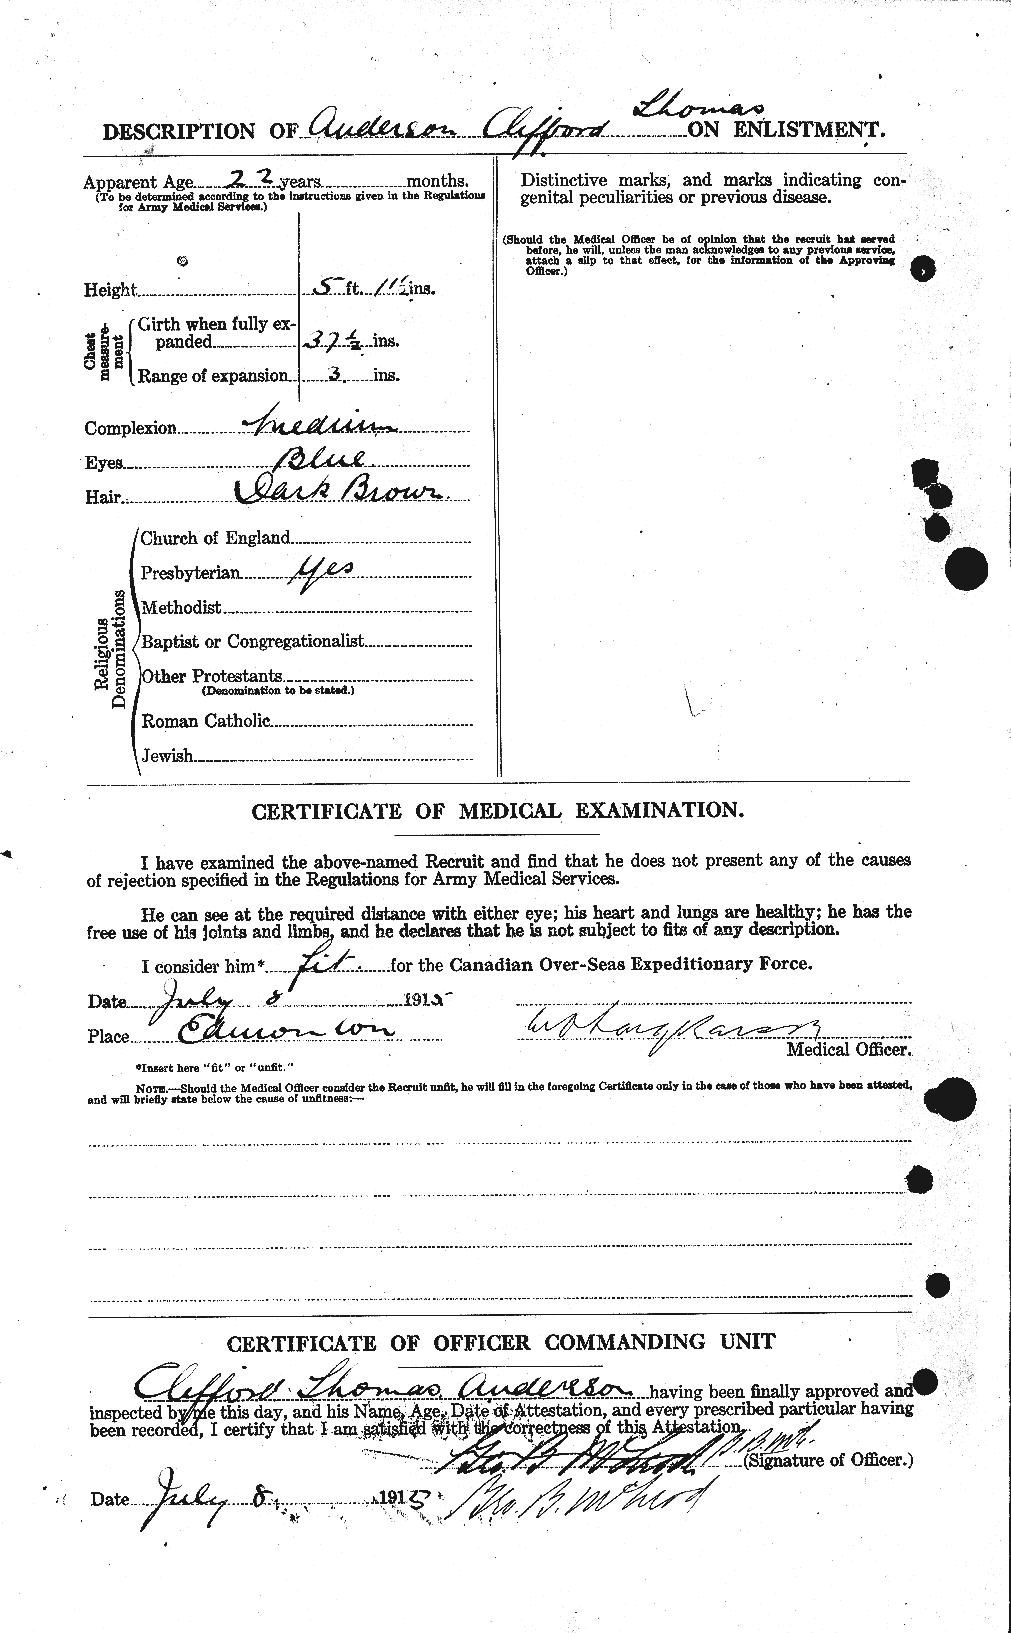 Personnel Records of the First World War - CEF 210059b